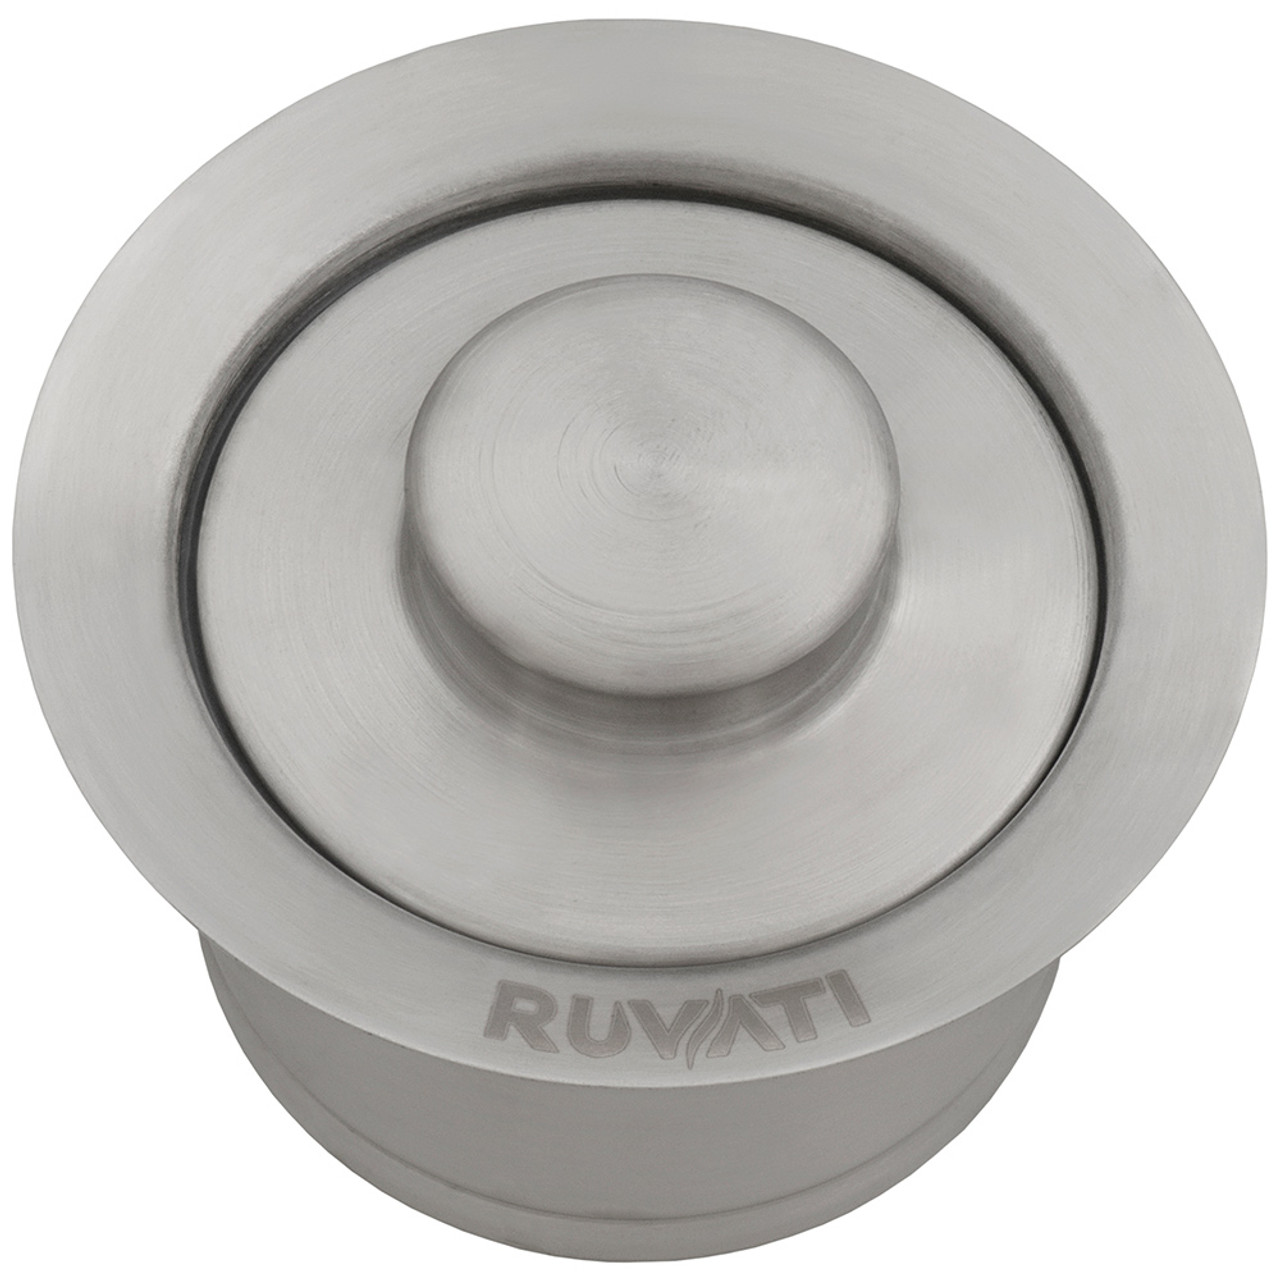 Ruvati Drain Cover for Kitchen Sink and Garbage Disposal, Brushed Stainless  Steel